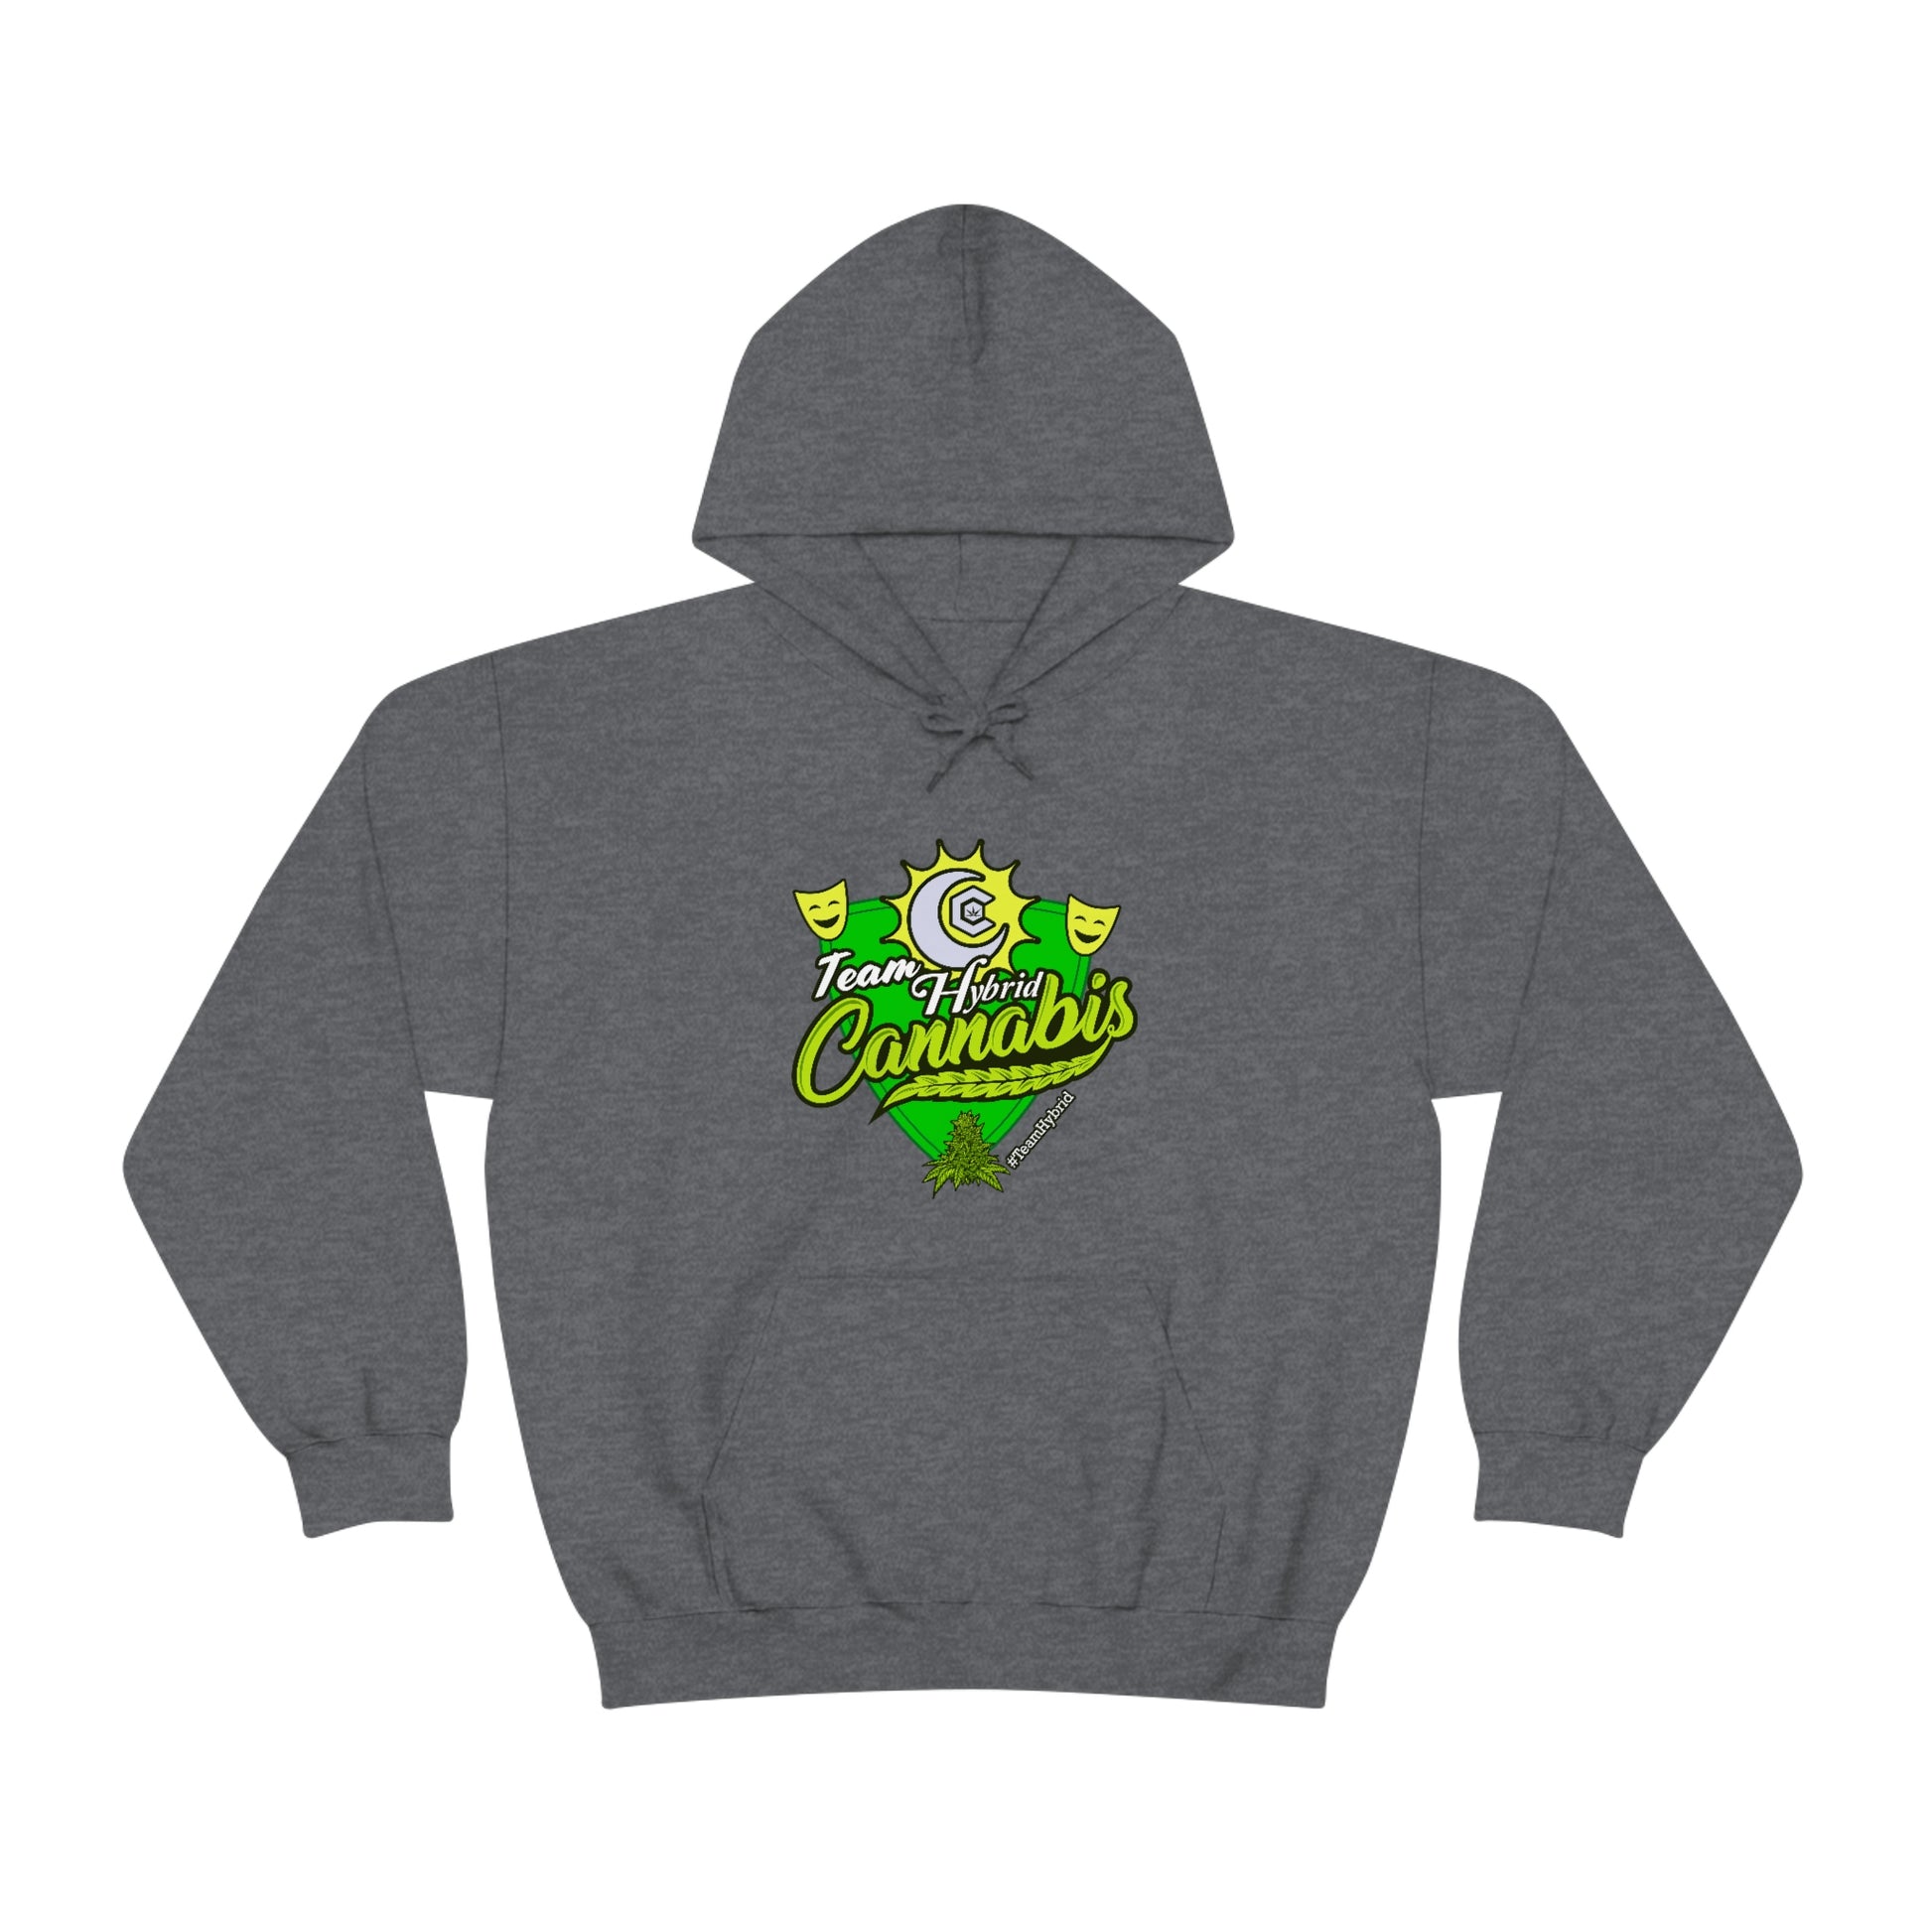 a Team Hybrid Cannabis Pullover Hoodie with a green and yellow design.